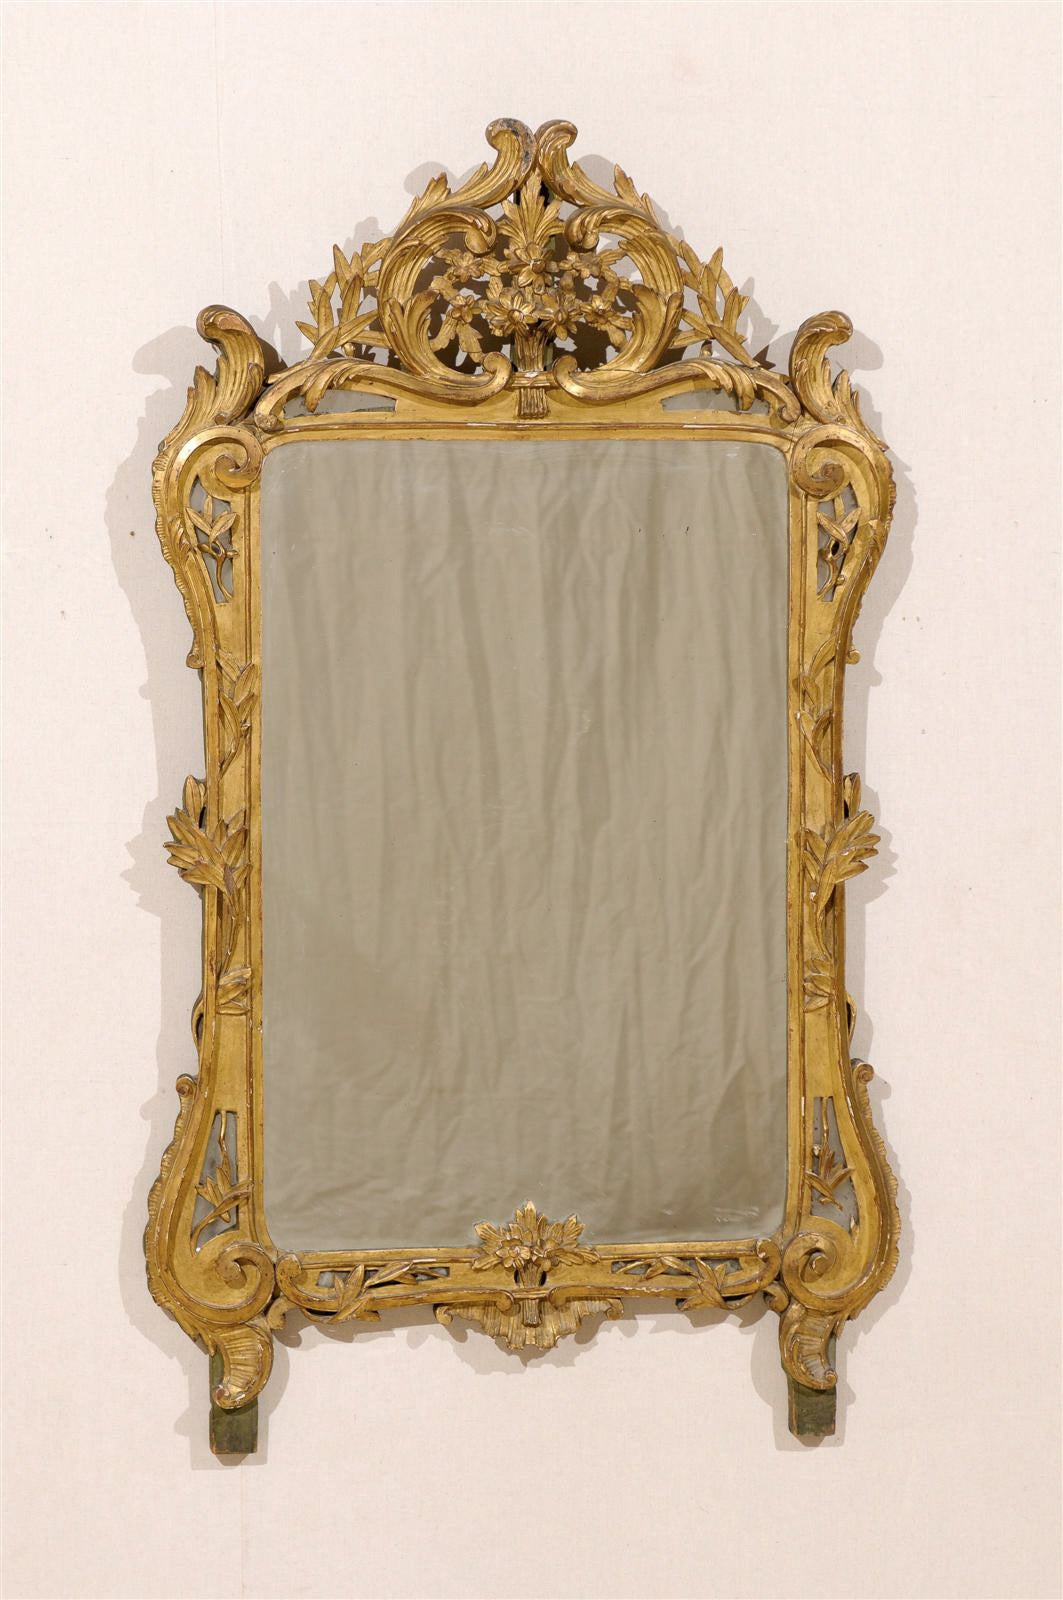 A French mid-19th century richly carved gilded wood mirror with C-scroll patterns. The delicately carved crown with its laurel leaves and flower bouquet motifs echoes the lower part, ornate with a discreet bouquet of flowers as well.